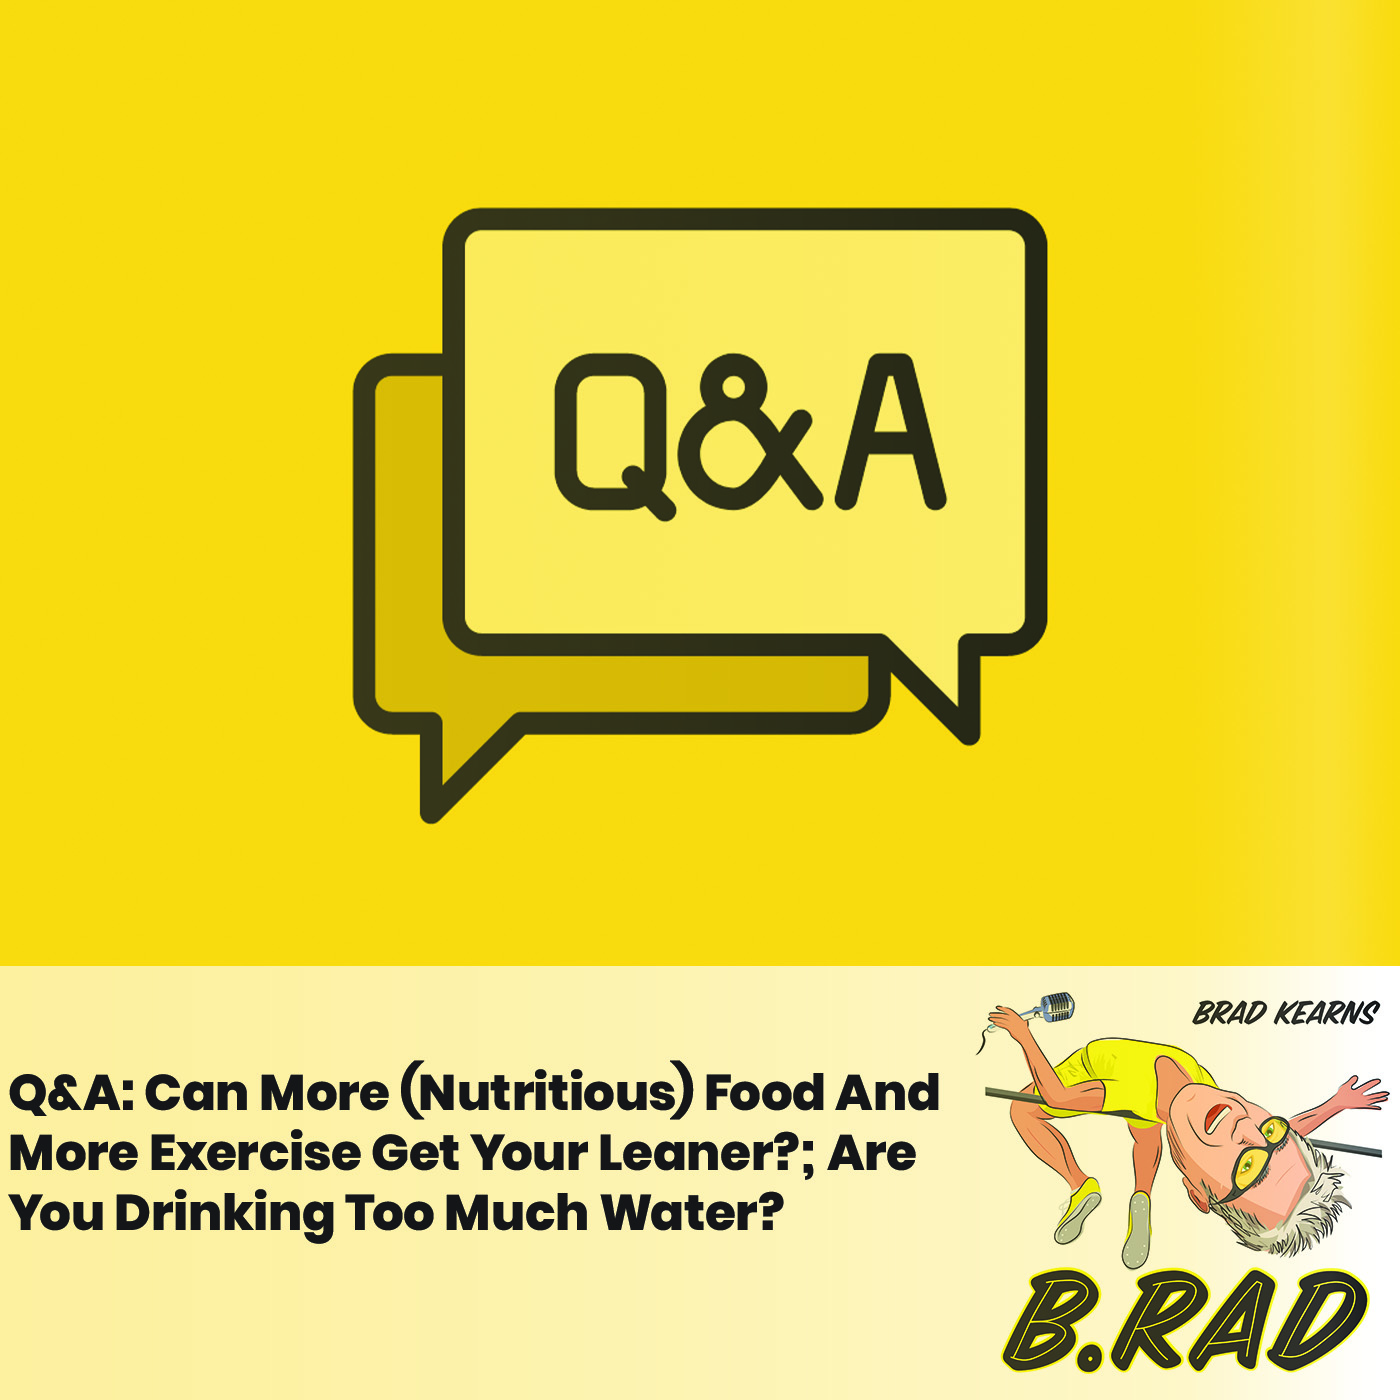 Q&A: Can More (Nutritious) Food And More Exercise Get Your Leaner?; Are You Drinking Too Much Water?